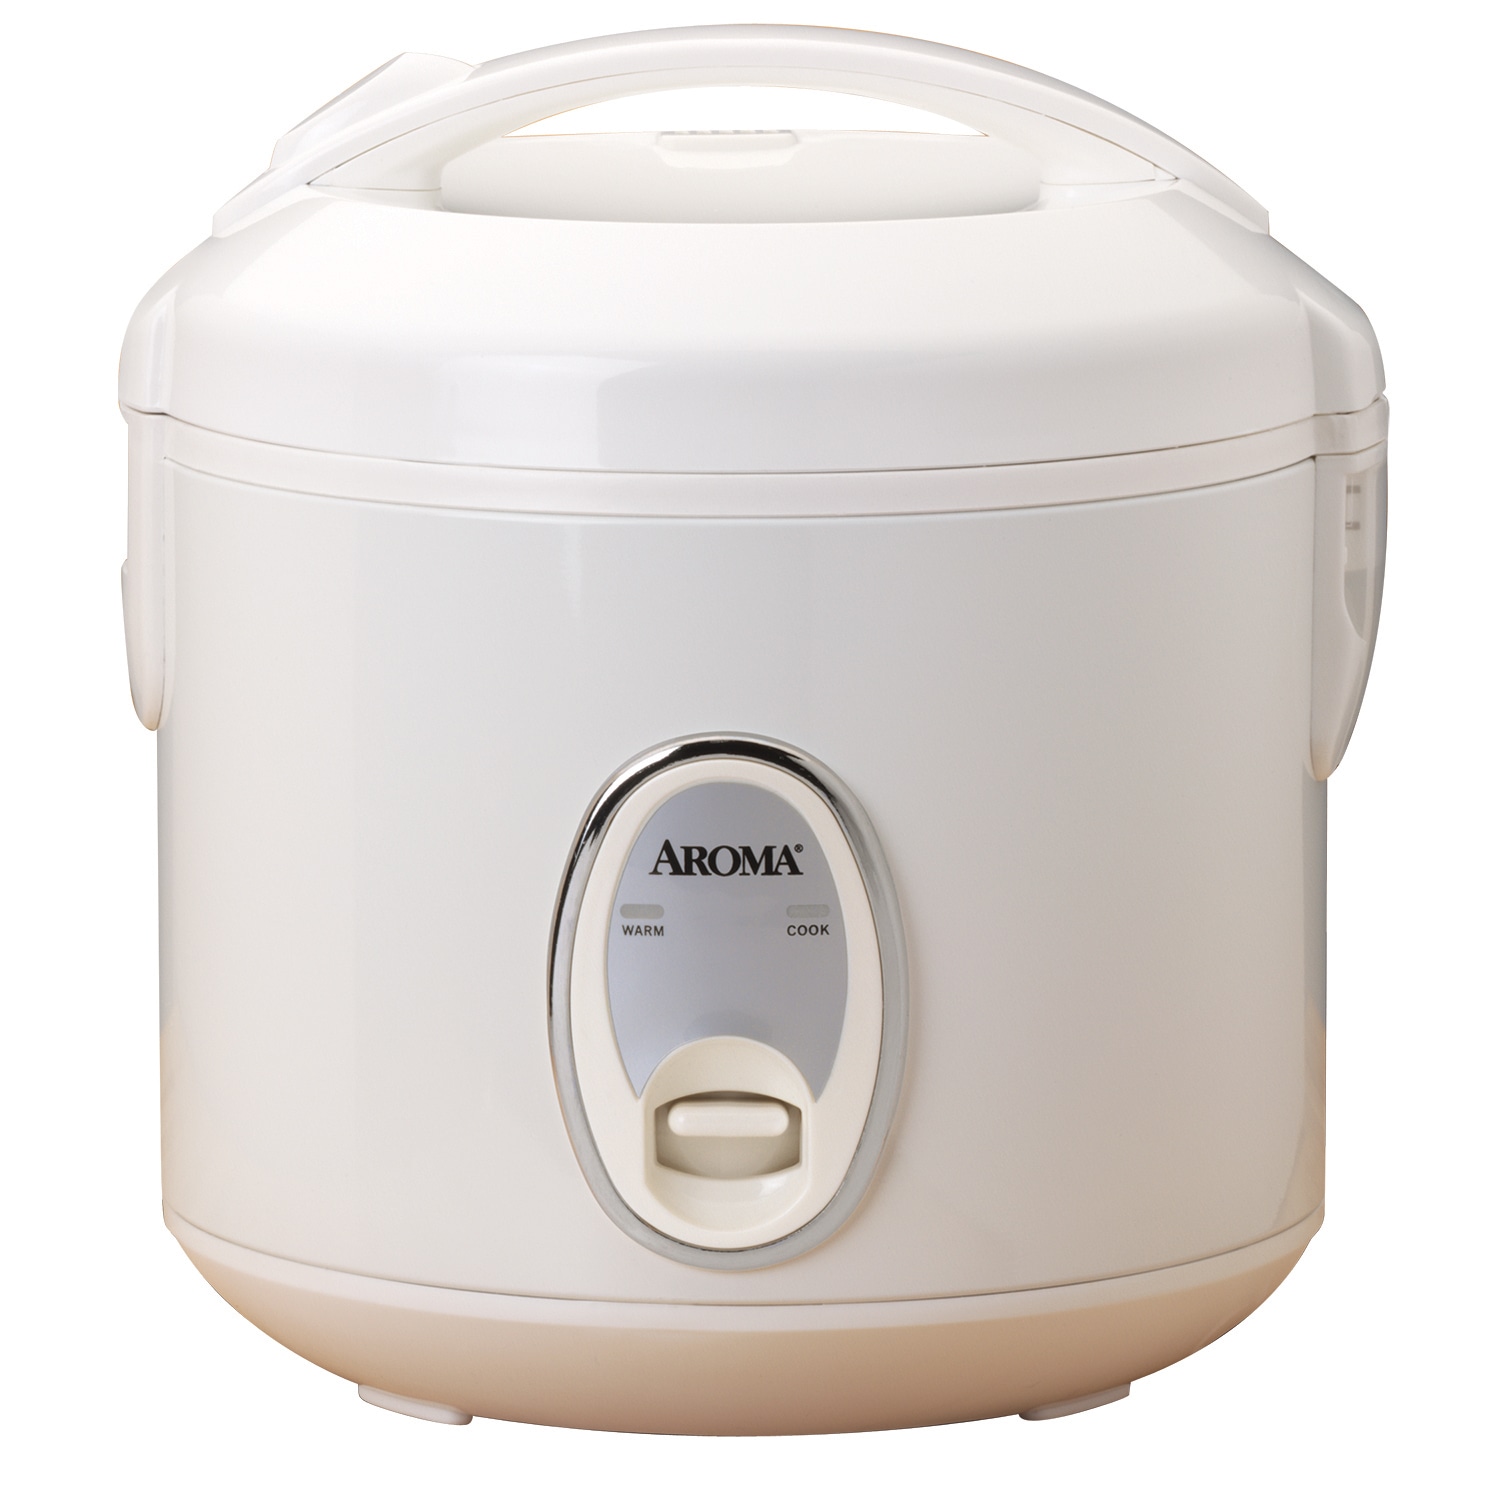 IMUSA 3-Cup Non-Stick White Rice Cooker with Non-Stick Cooking Pot